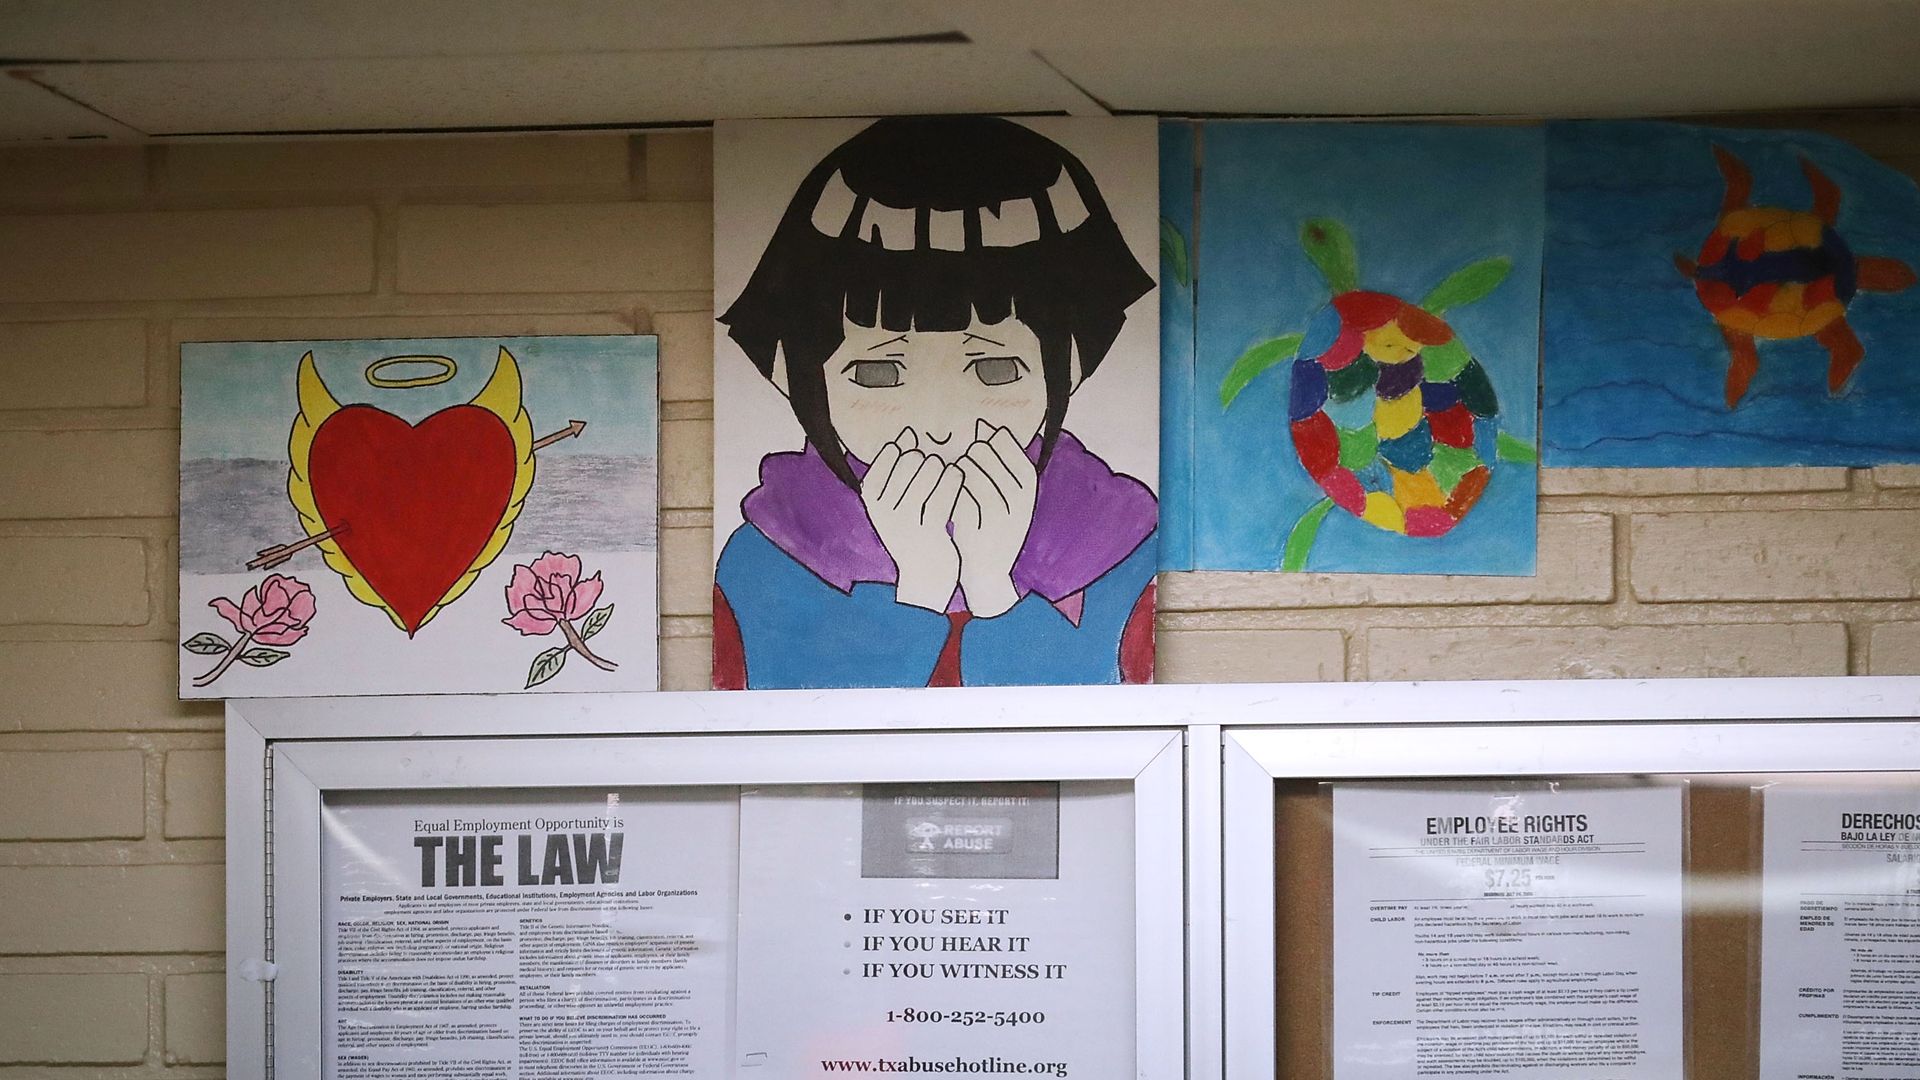 Posters and child paintings in an HHS child shelter